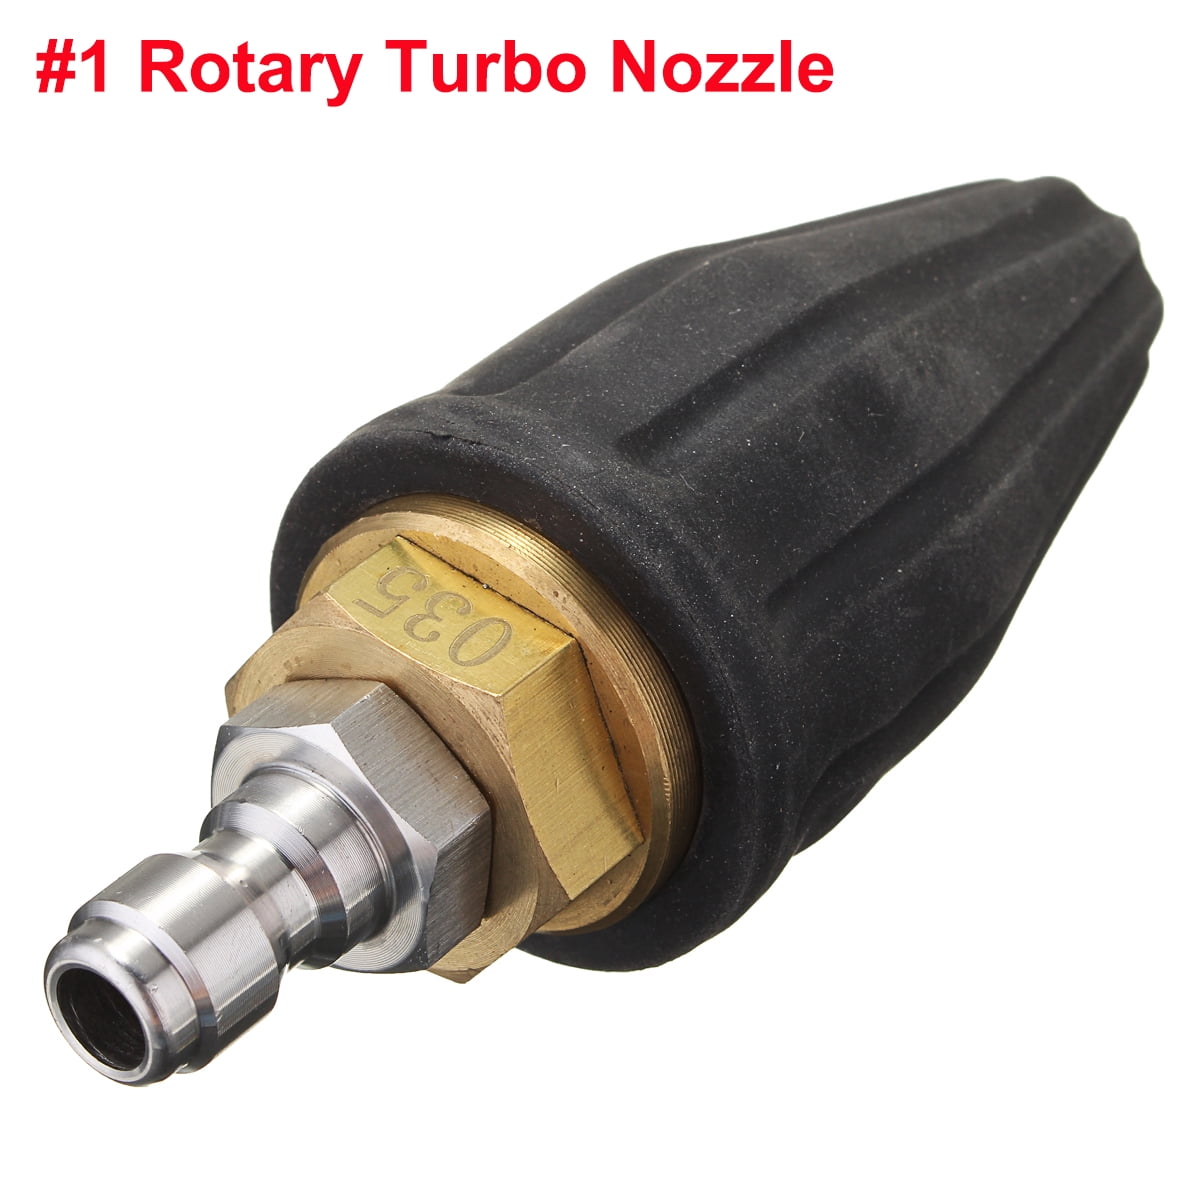 Black Rotating High Power Washer Turbo Nozzle 3600 PSI 4.0 GPM 250 BAR 